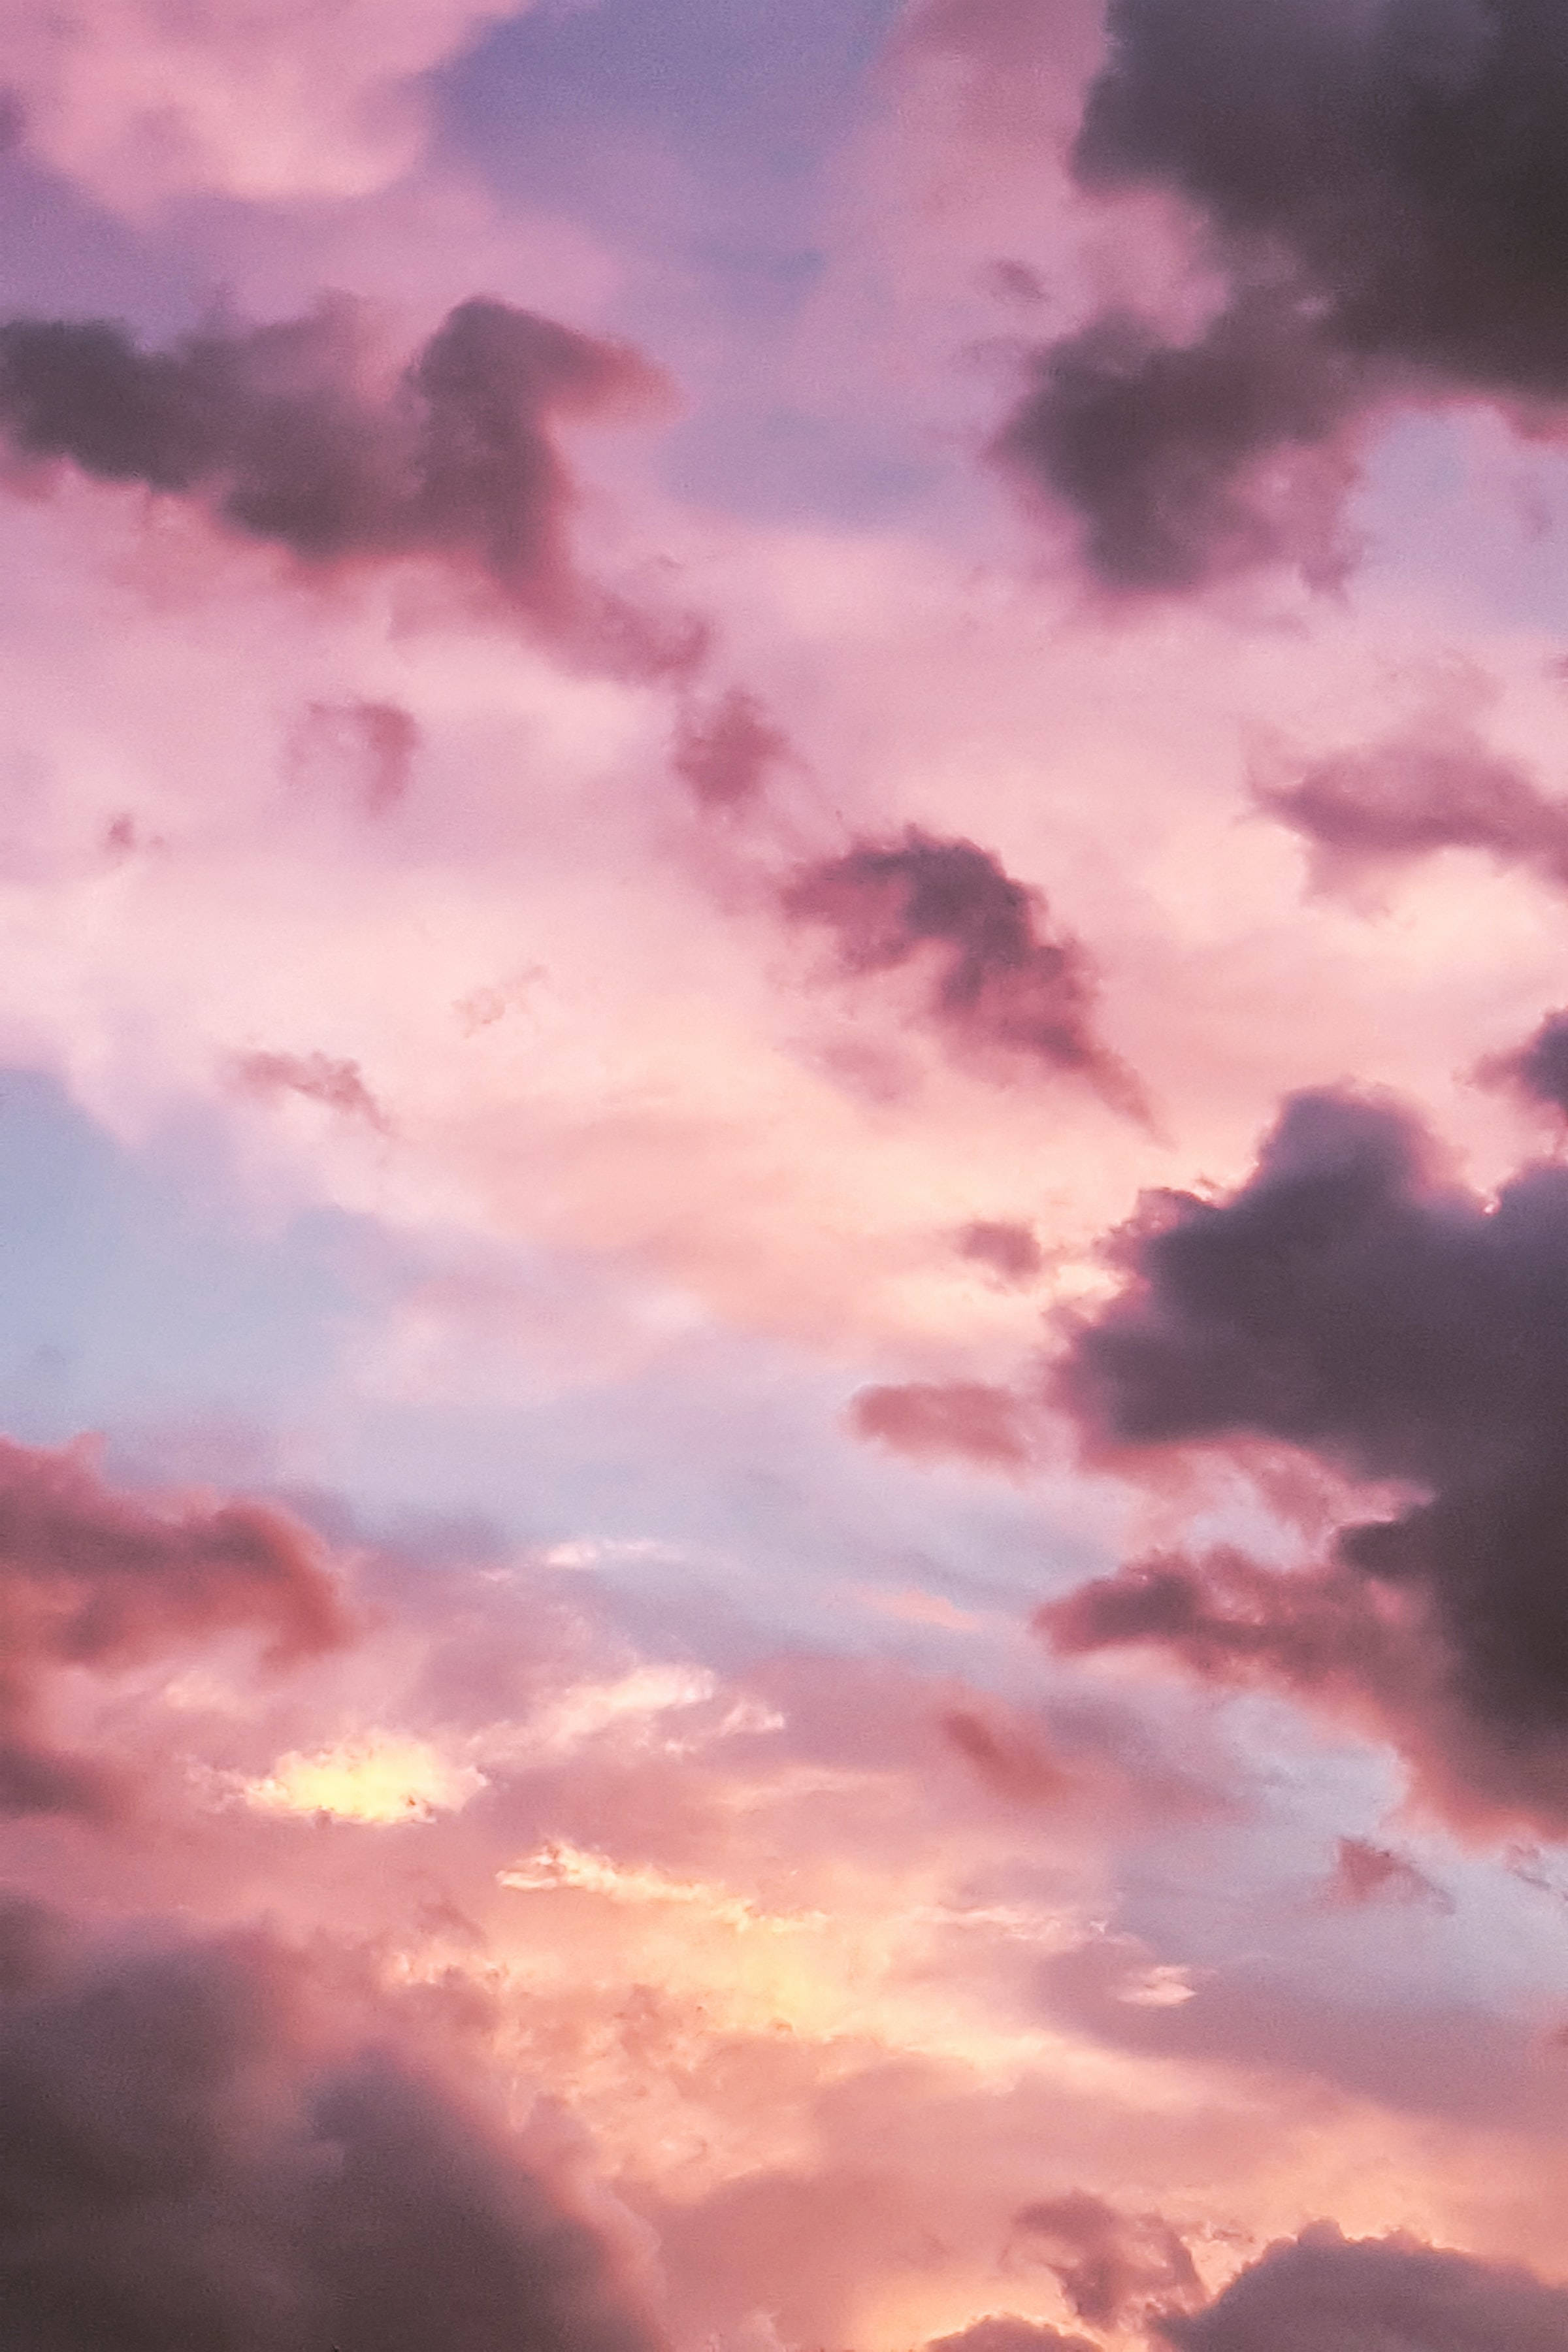 Cute Pink Aesthetic Sky With Overcast Clouds Wallpaper